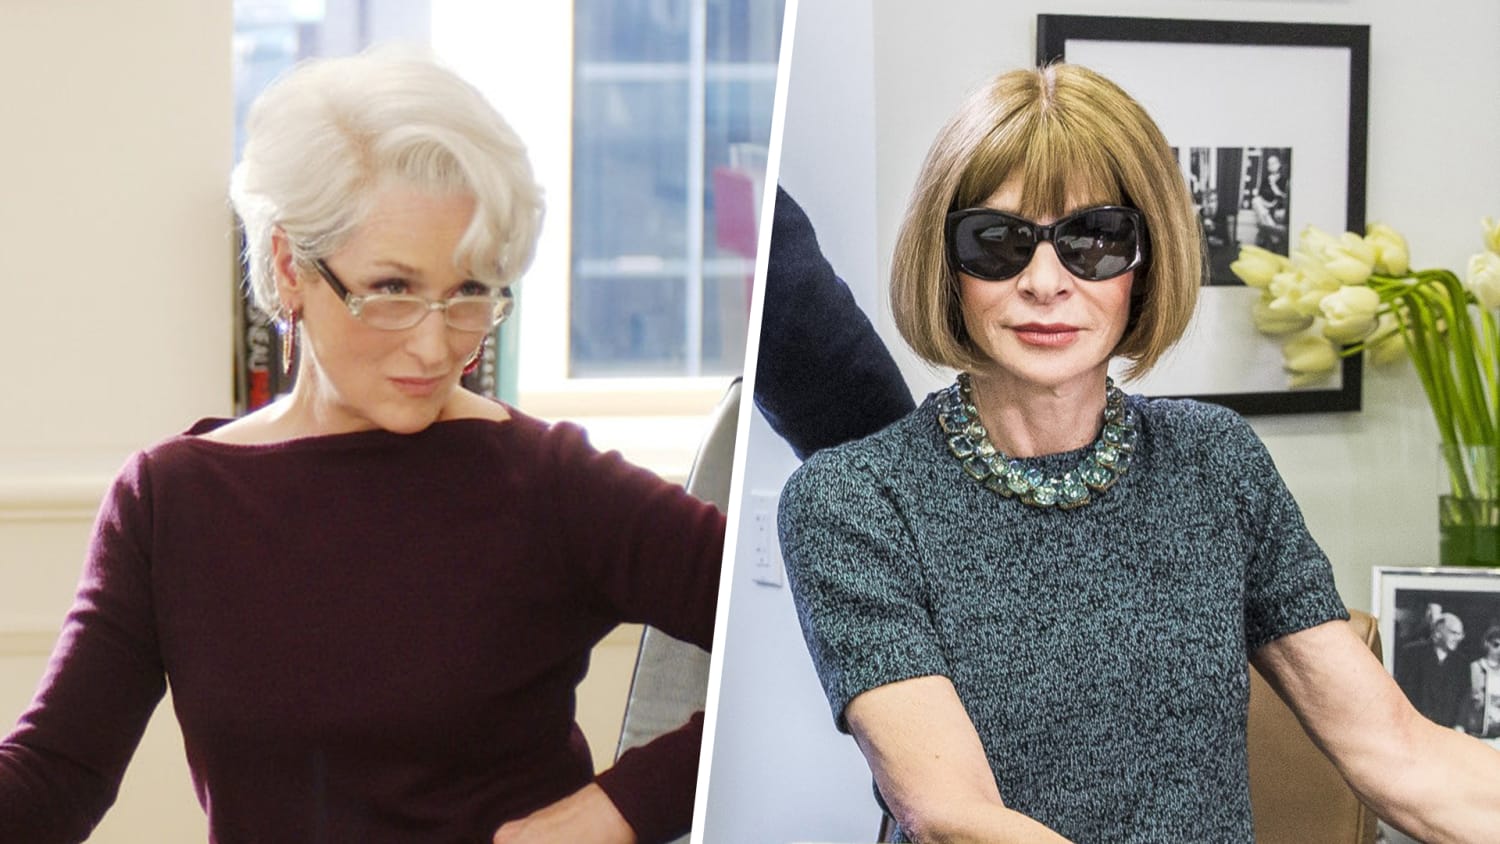 Meryl Streep Channels Devil Wears Prada Character For Meeting With Anna Wintour